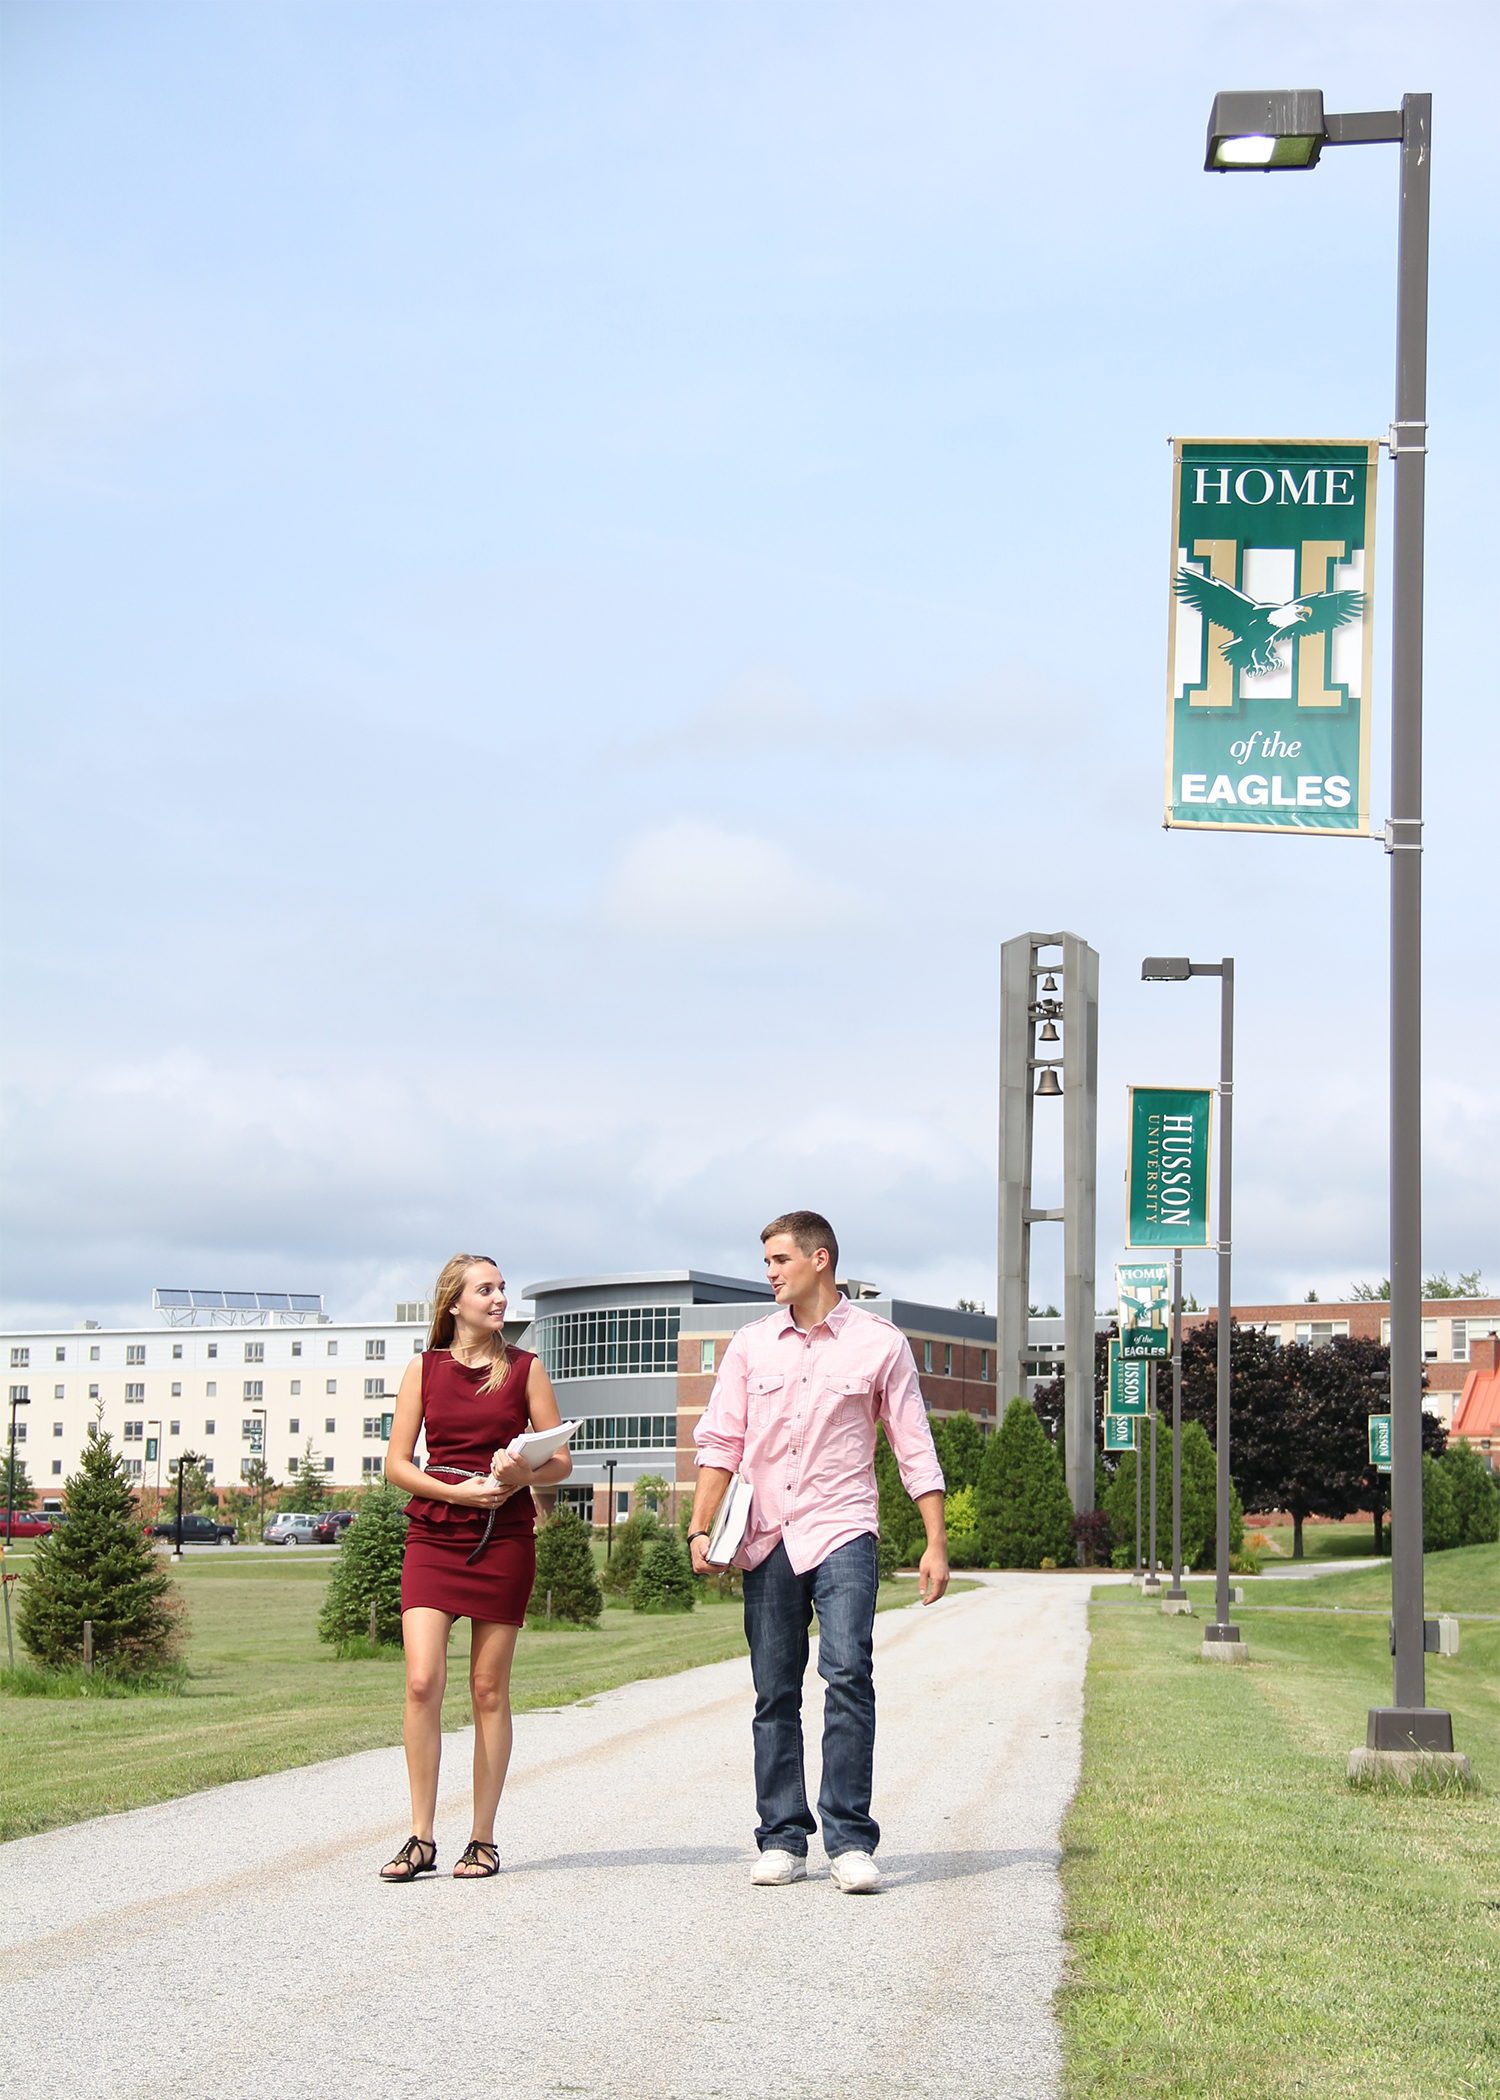 Students enjoy the beautiful, 208-acre scenic campus at Husson University in Bangor, Maine.